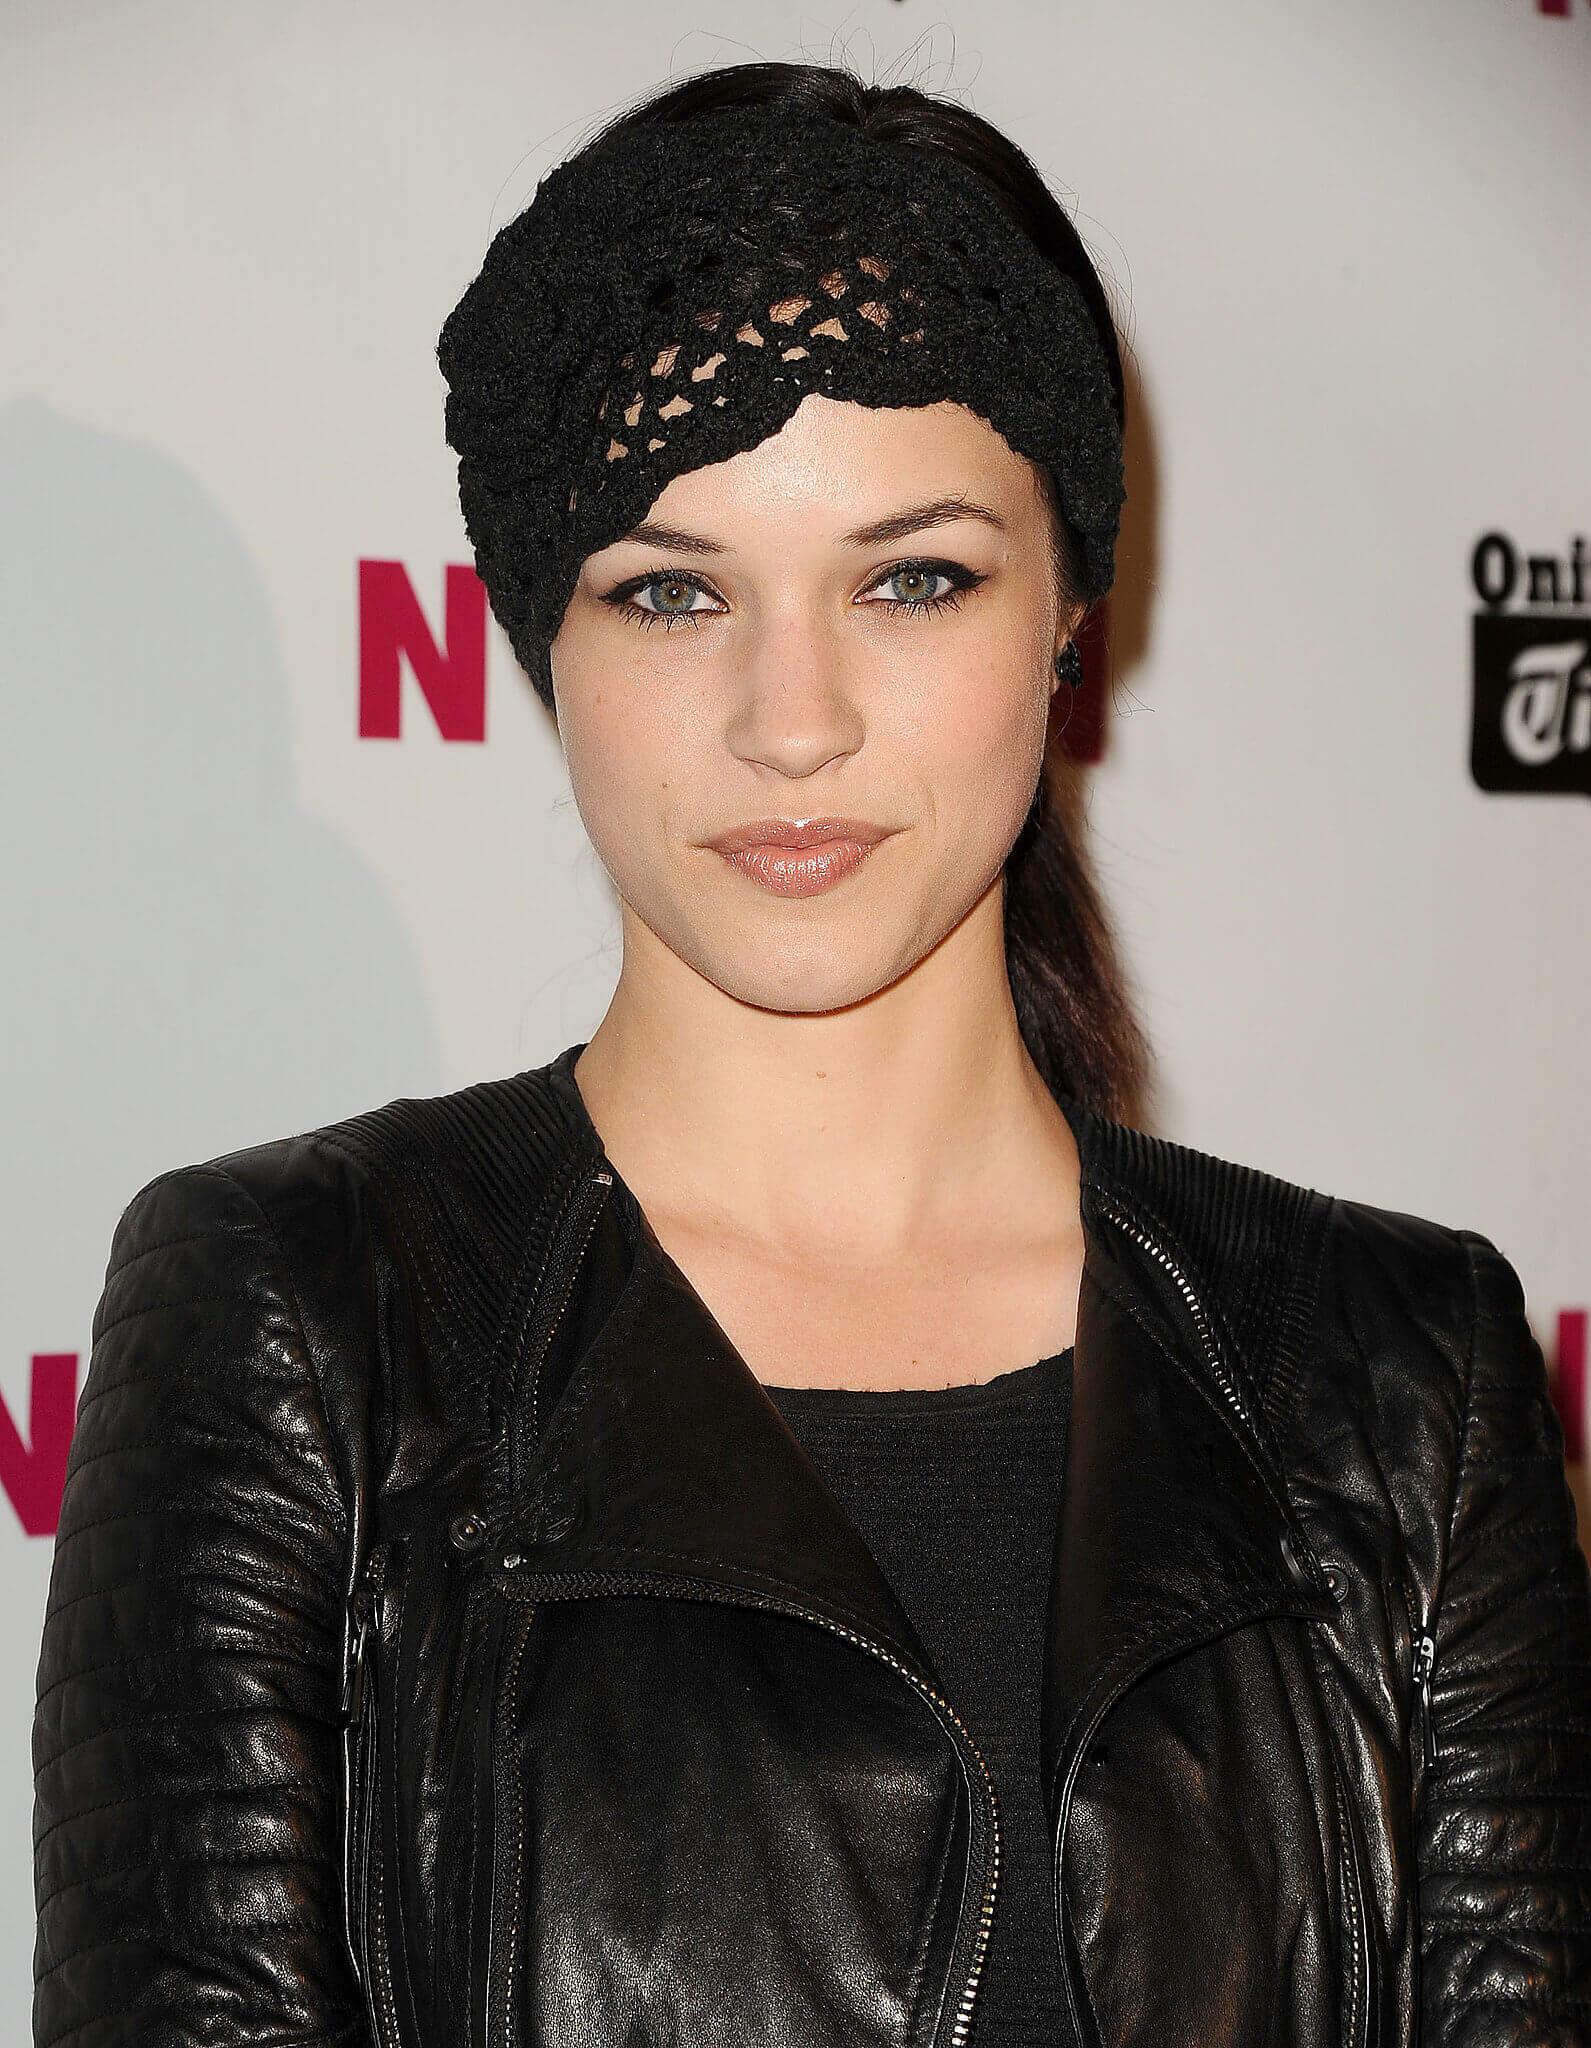 Hottest Alexis Knapp Bikini Pictures Will Inspire You To Get Rich